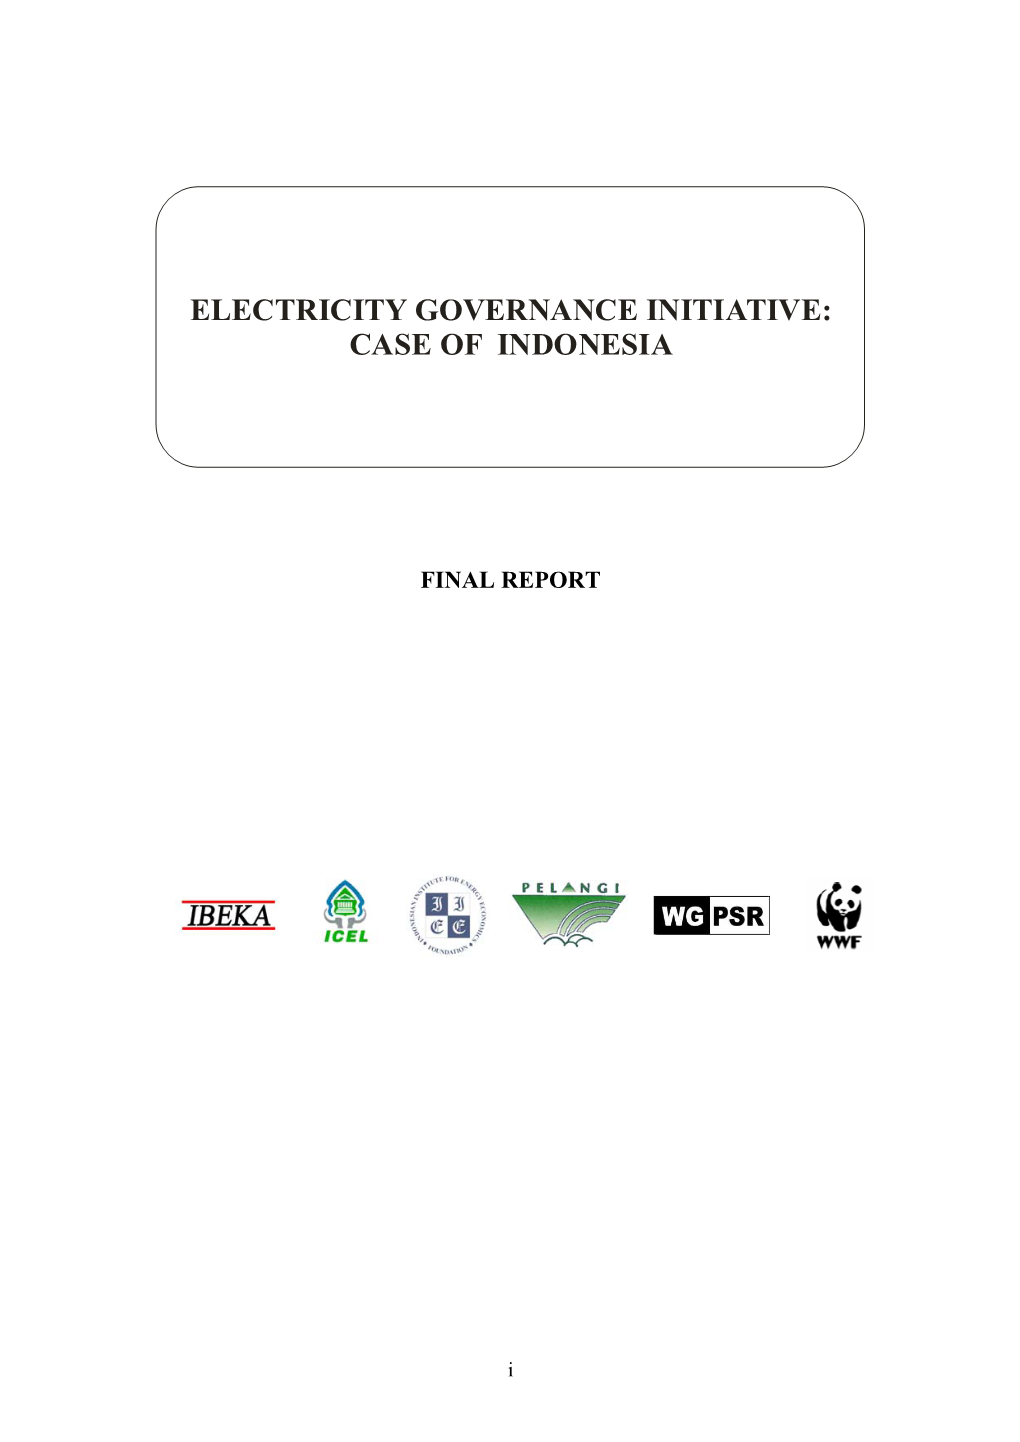 Electricity Governance Initiative: Case of Indonesia